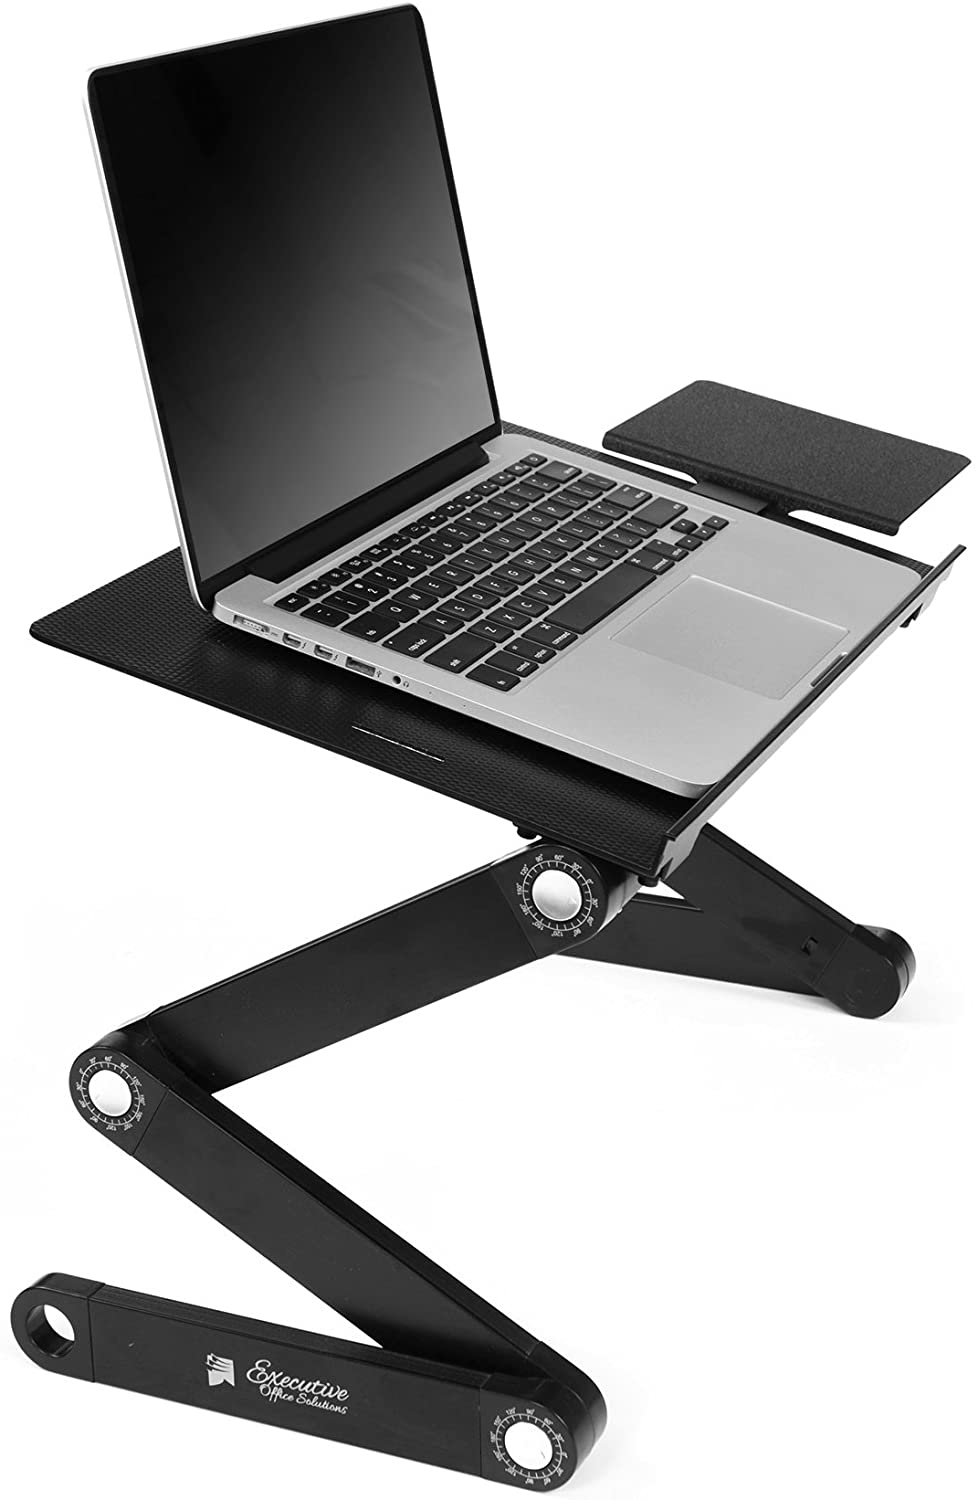 Notebook Stand Compatible with Most 10-17” Laptops Ergonomic Laptop Riser Laptop Mount for Desk Space Grey LORYERGO Laptop Stand